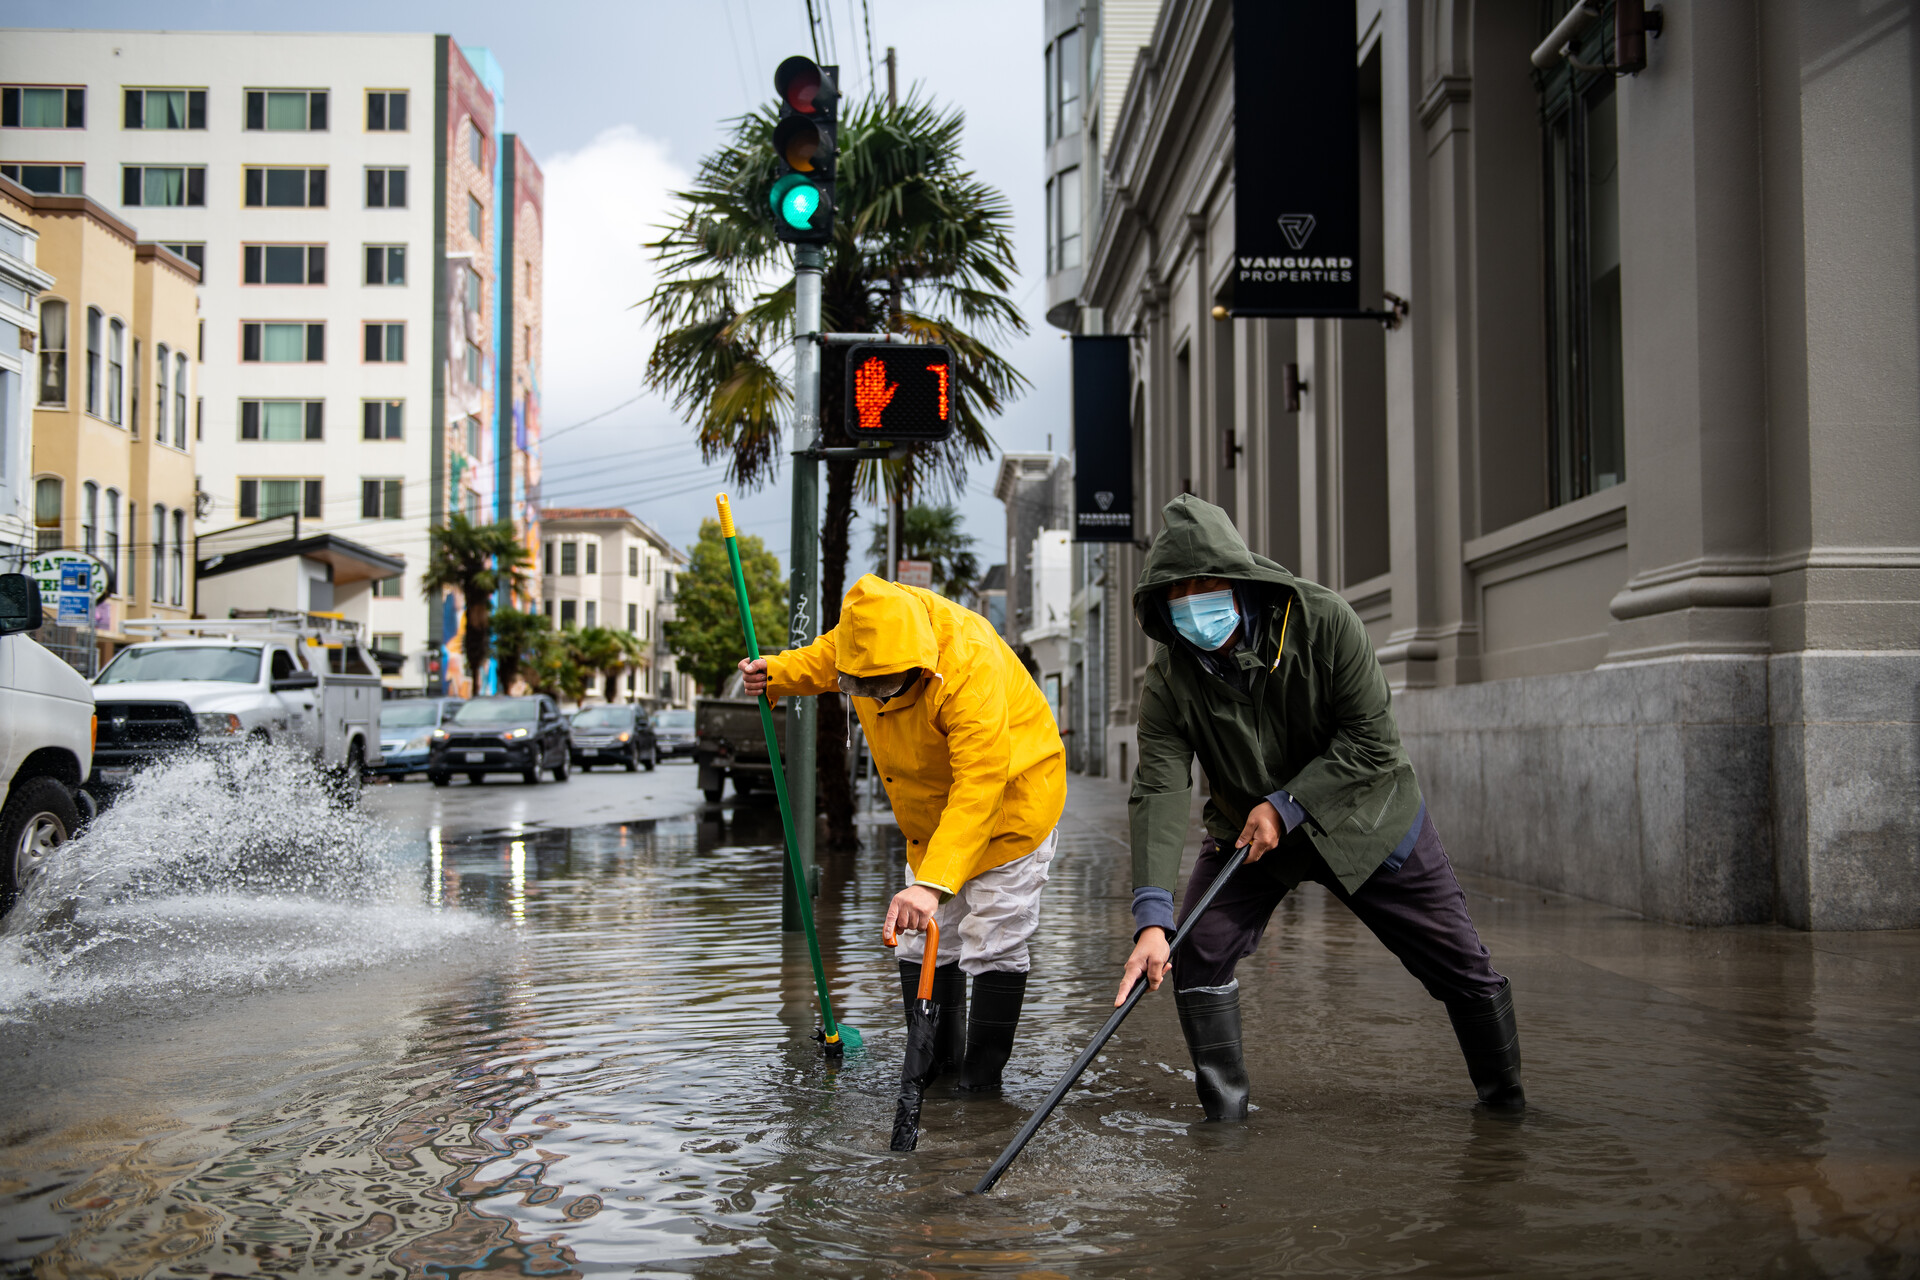 Two people stand in deep water working with long tools in an urban setting.